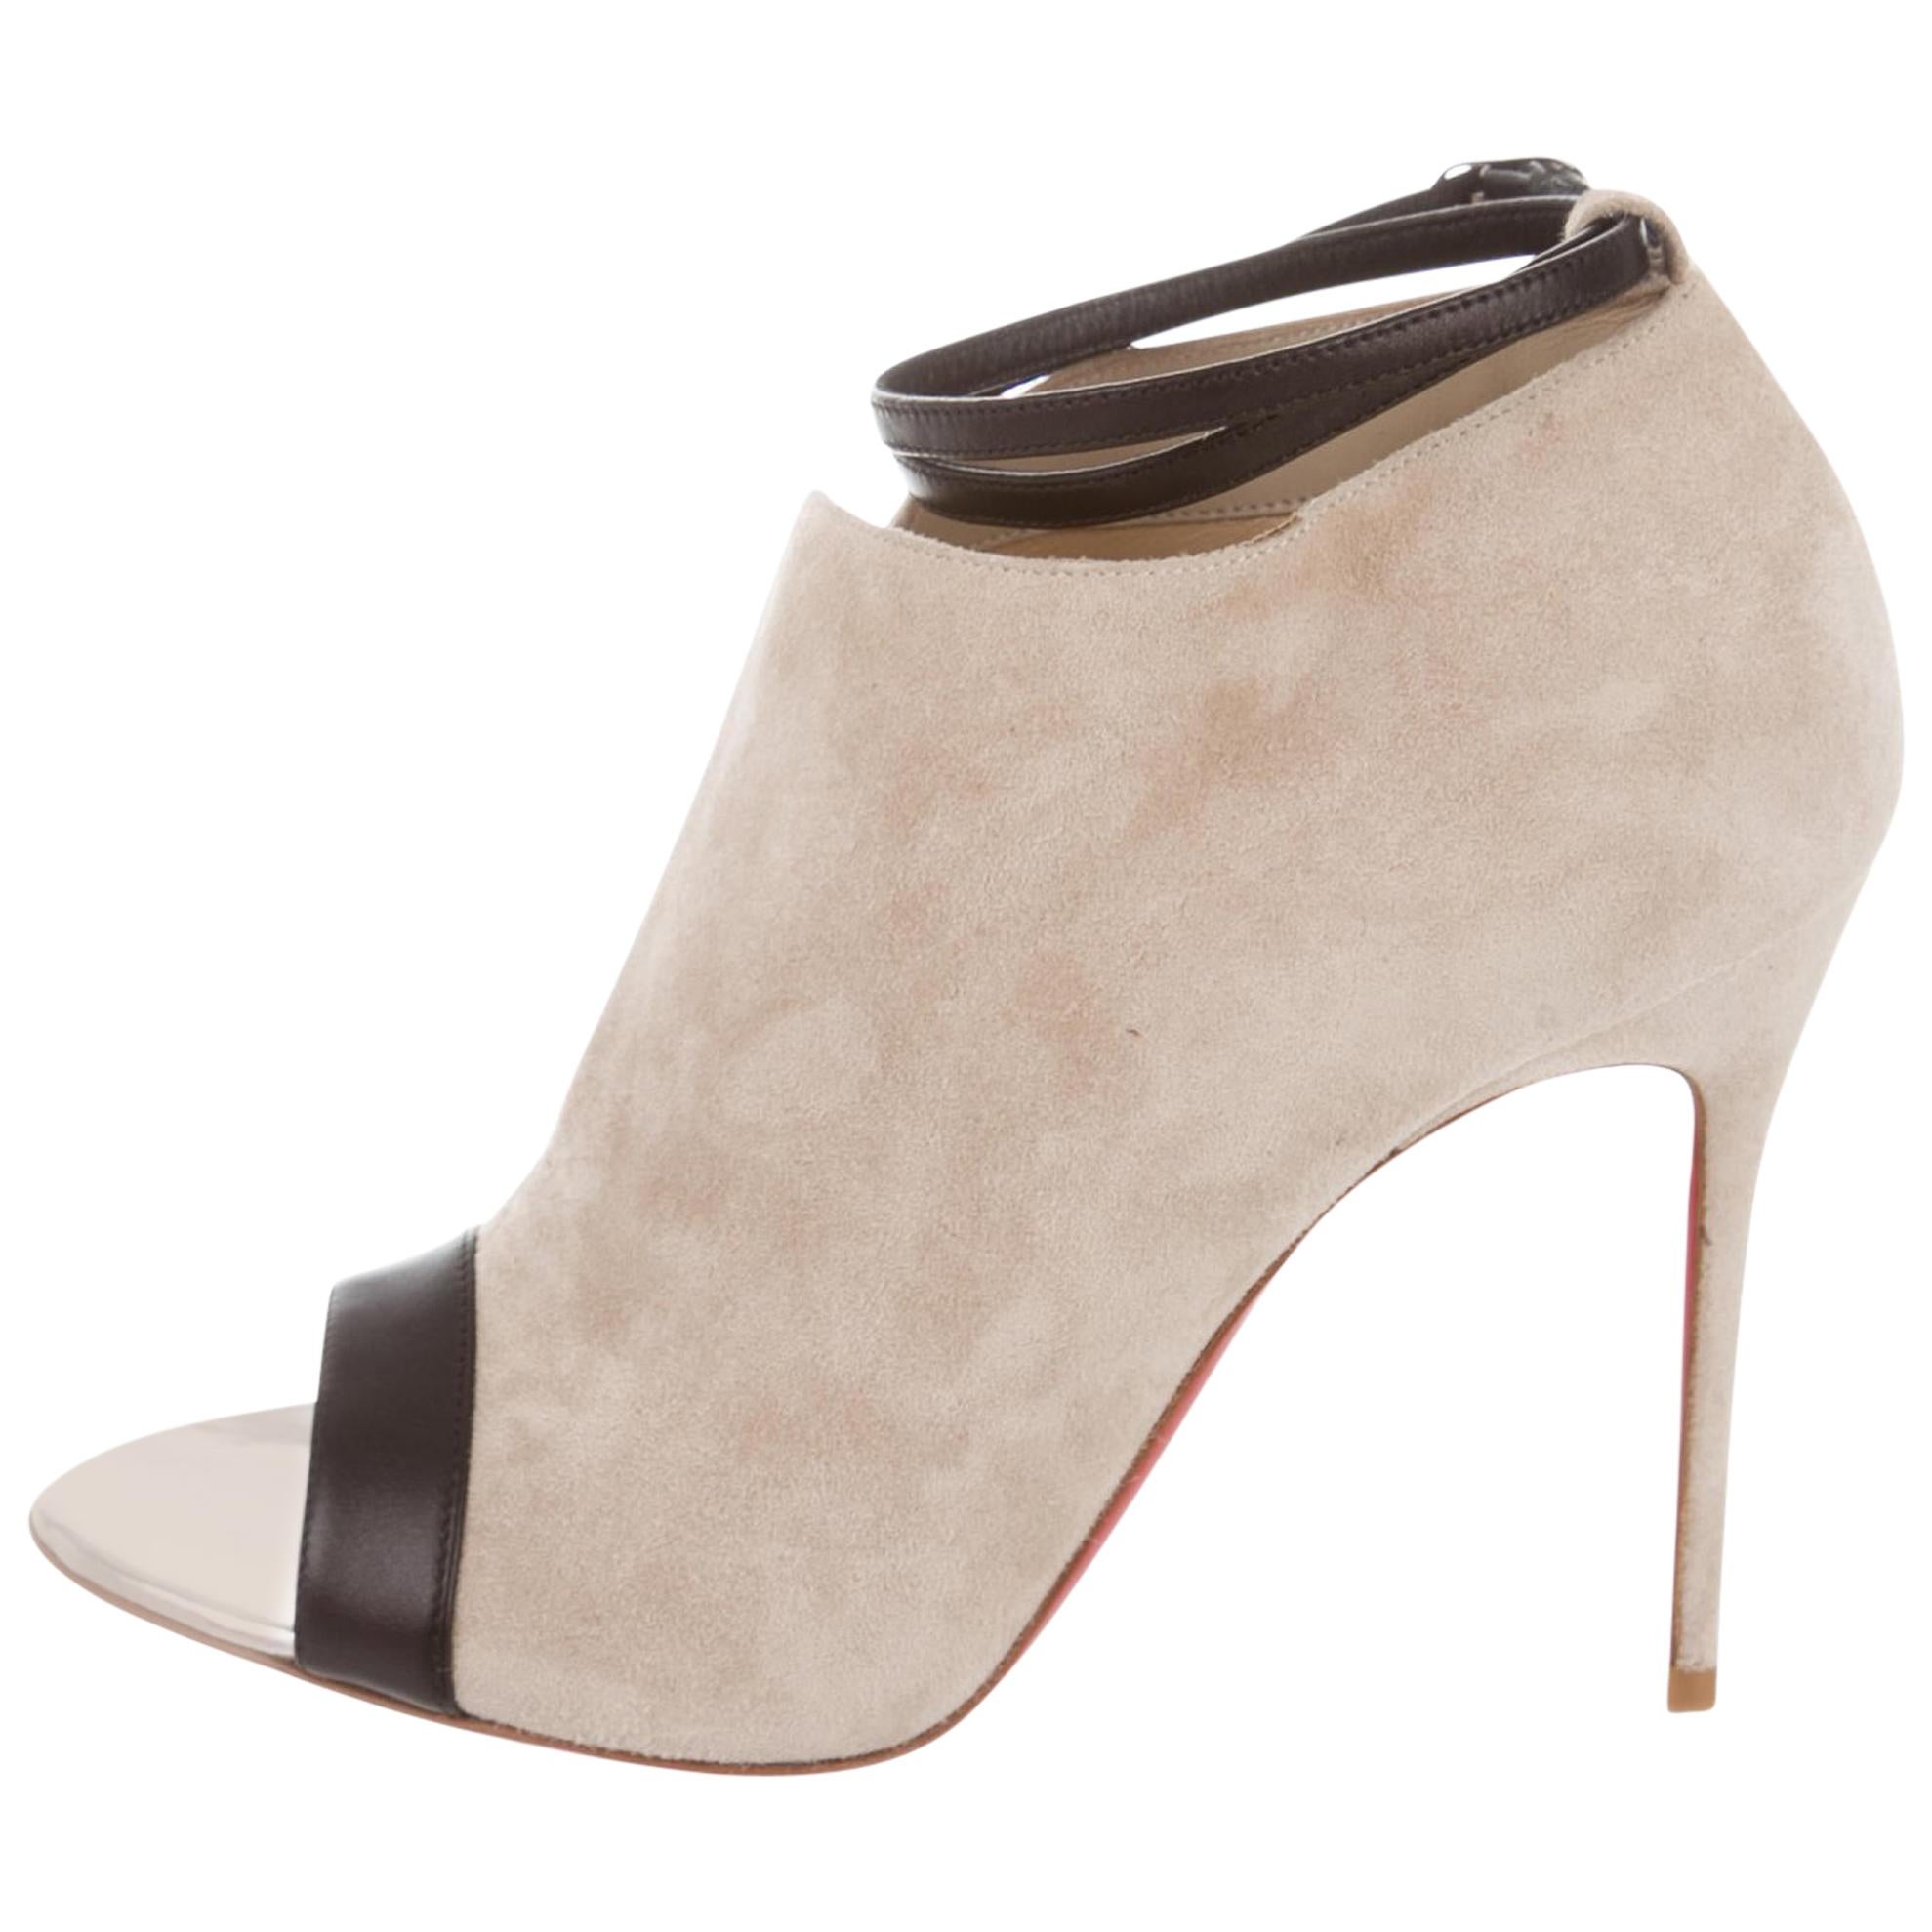 Christian Louboutin NEW Tan Nude Black Leather Slit Suede Evening Boots Booties